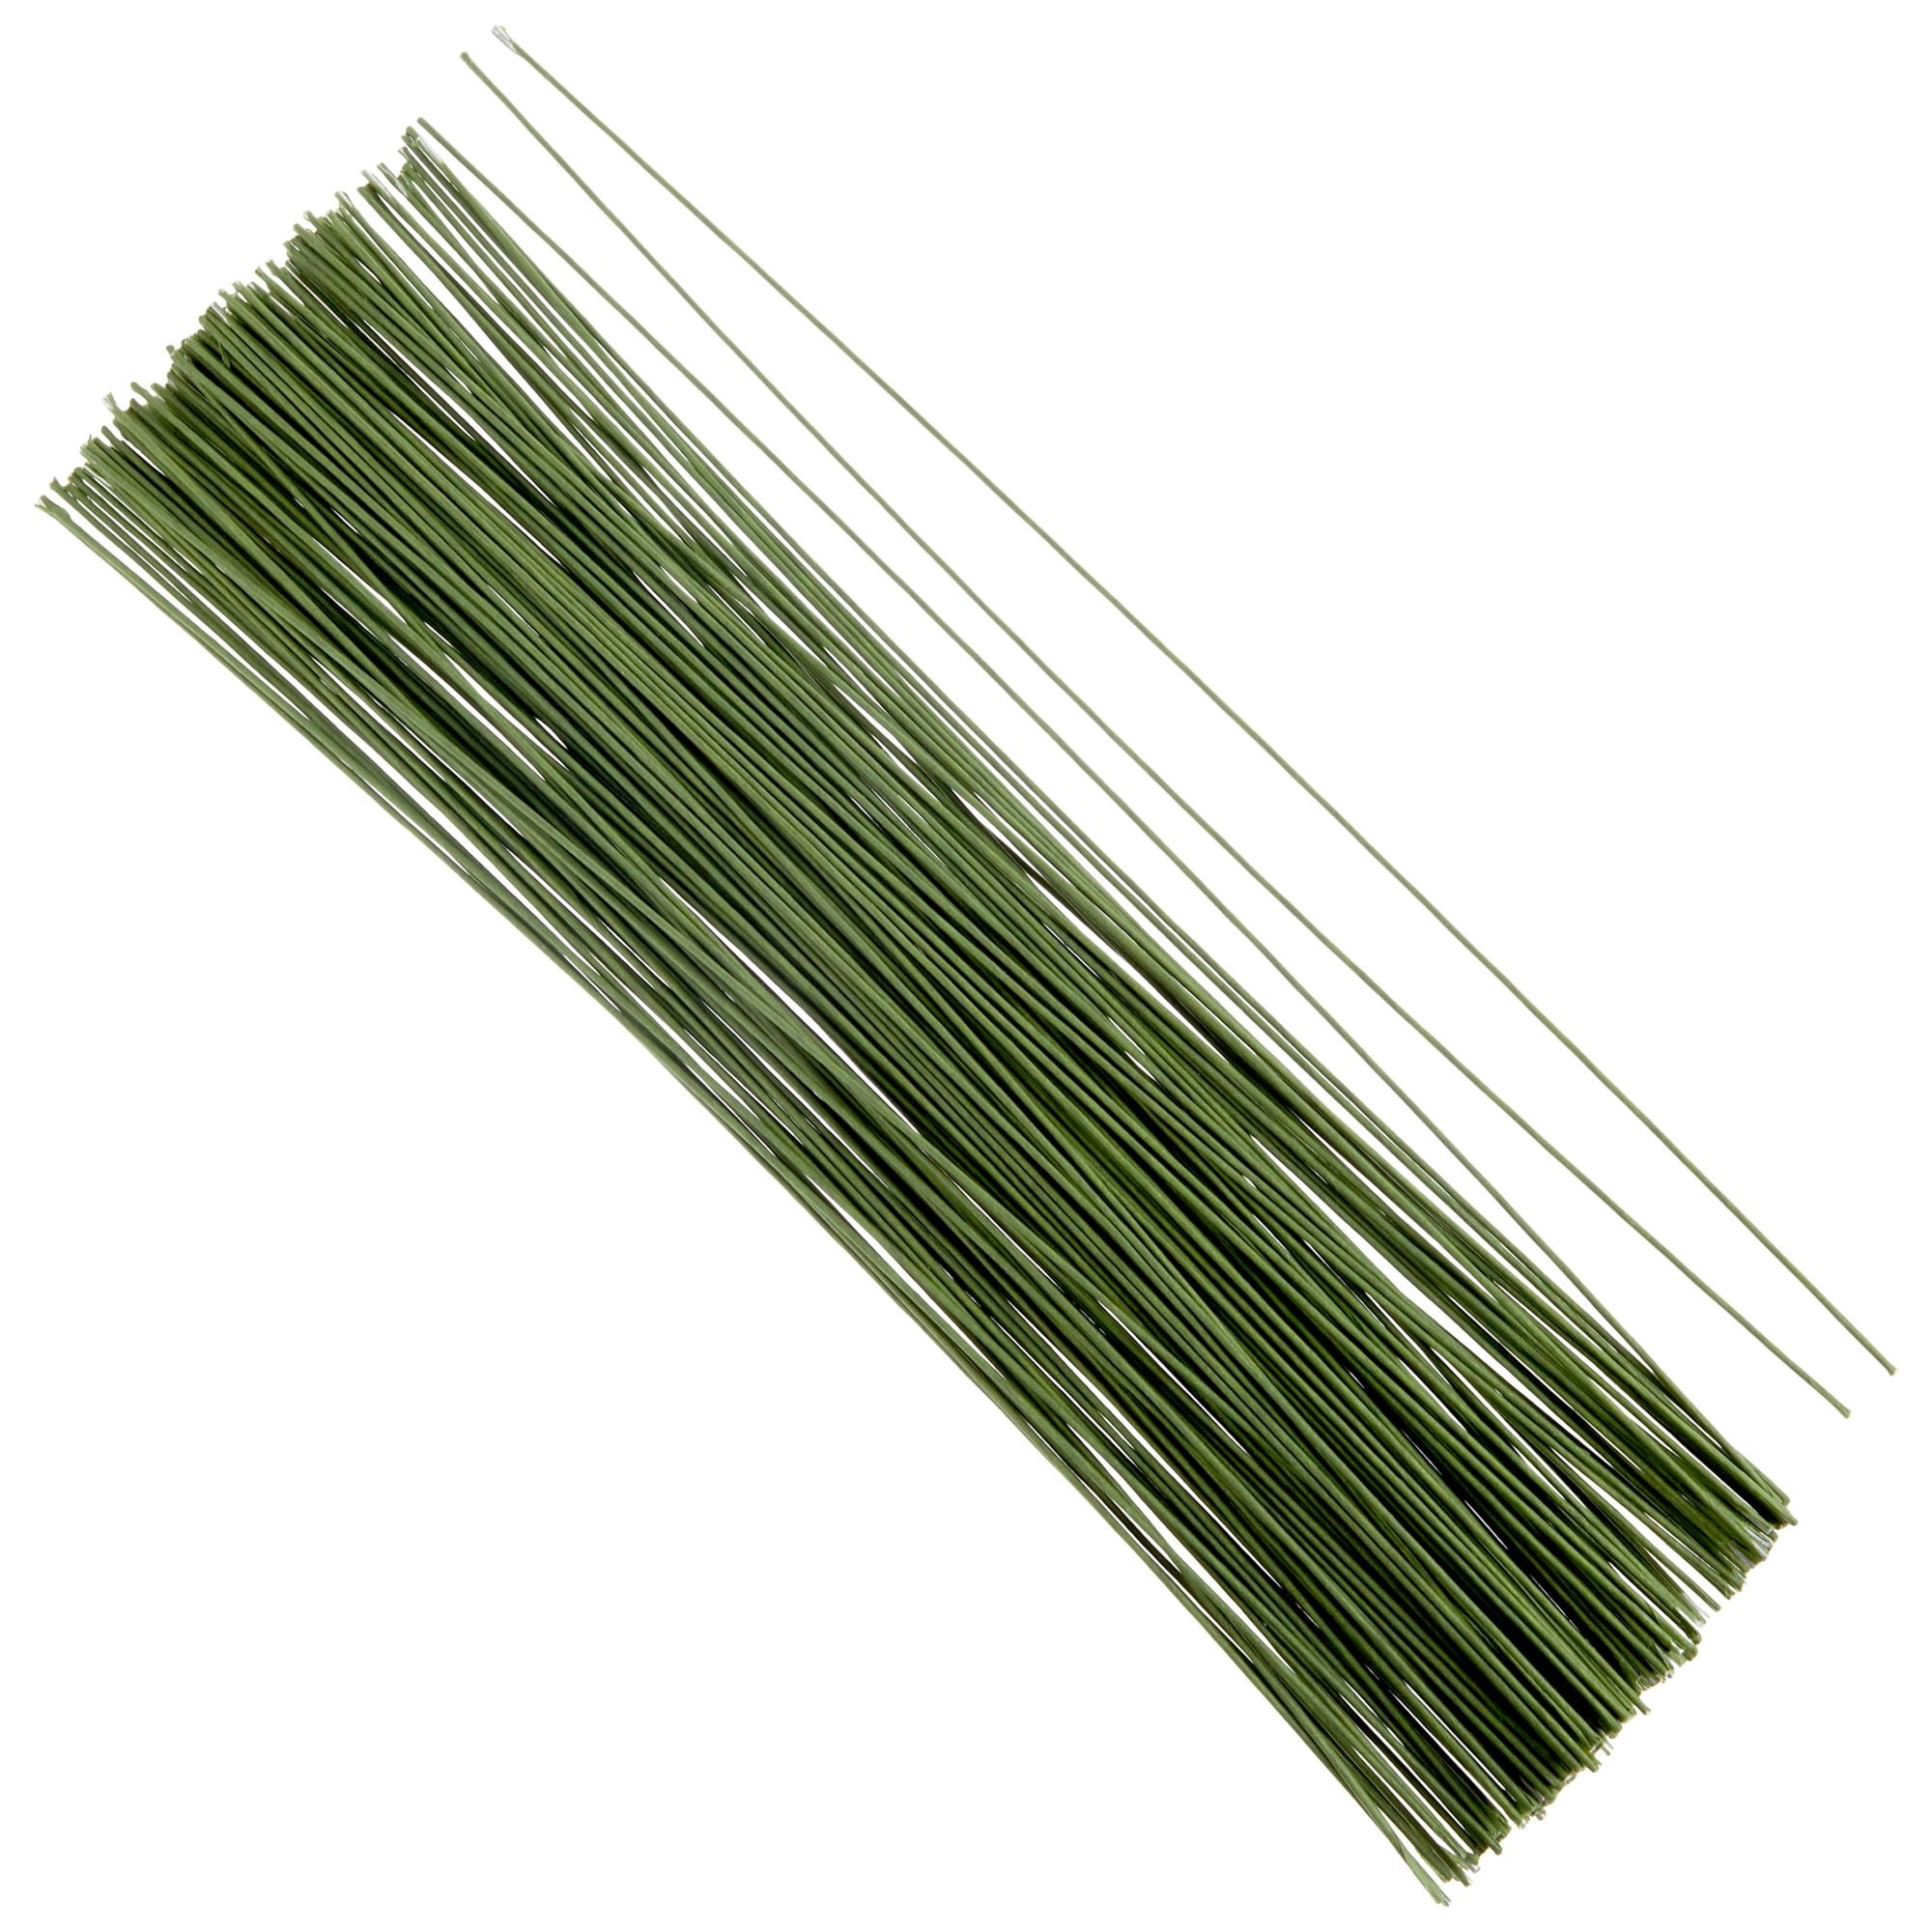 18 Gauge Green Floral Stem Wire 16 inch,50/Package